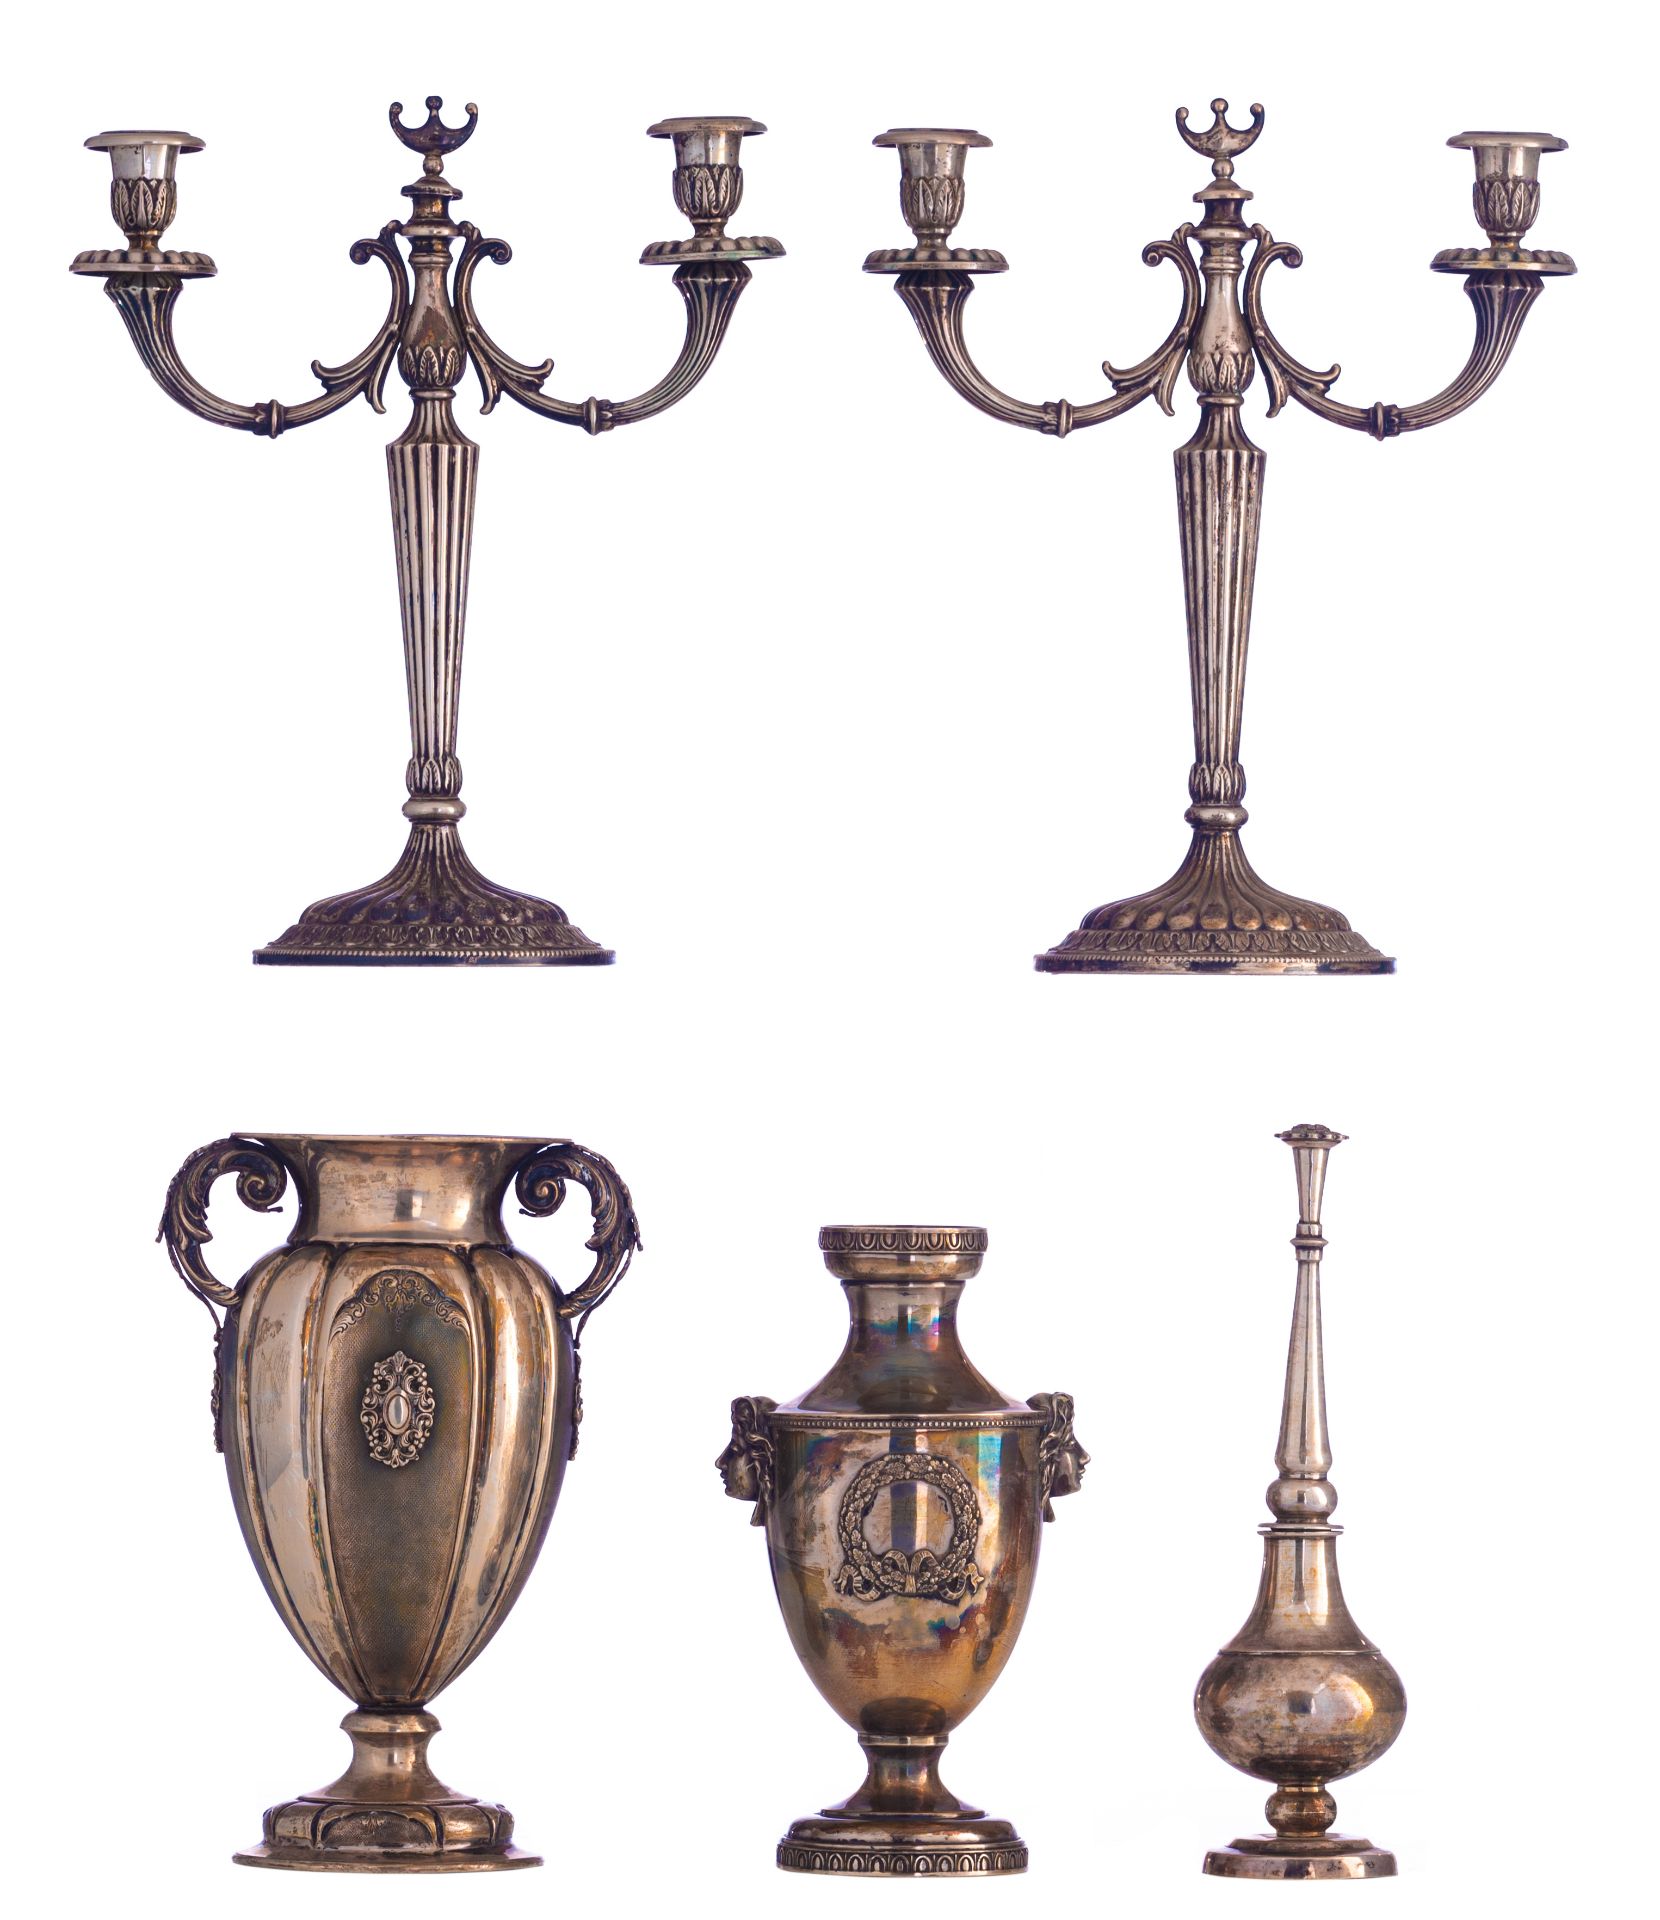 A pair of silver Neoclassical candlesticks, Belgian, maker's mark P.A., 800/000. Added: a silver Neo